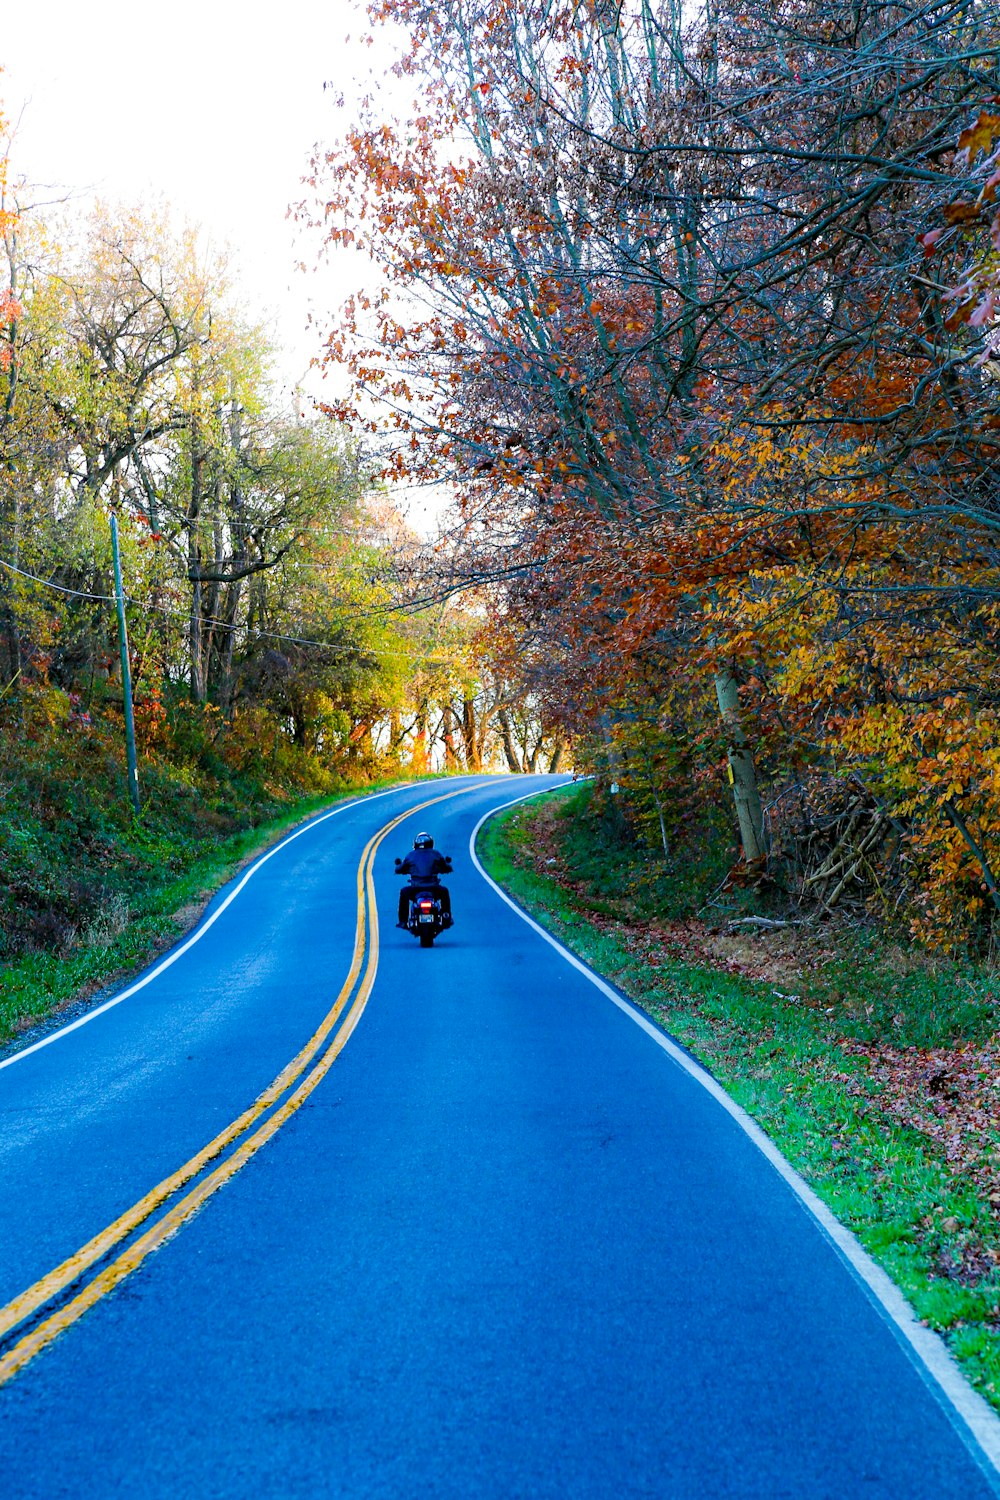 a motorcyclist rides down a winding road in the fall